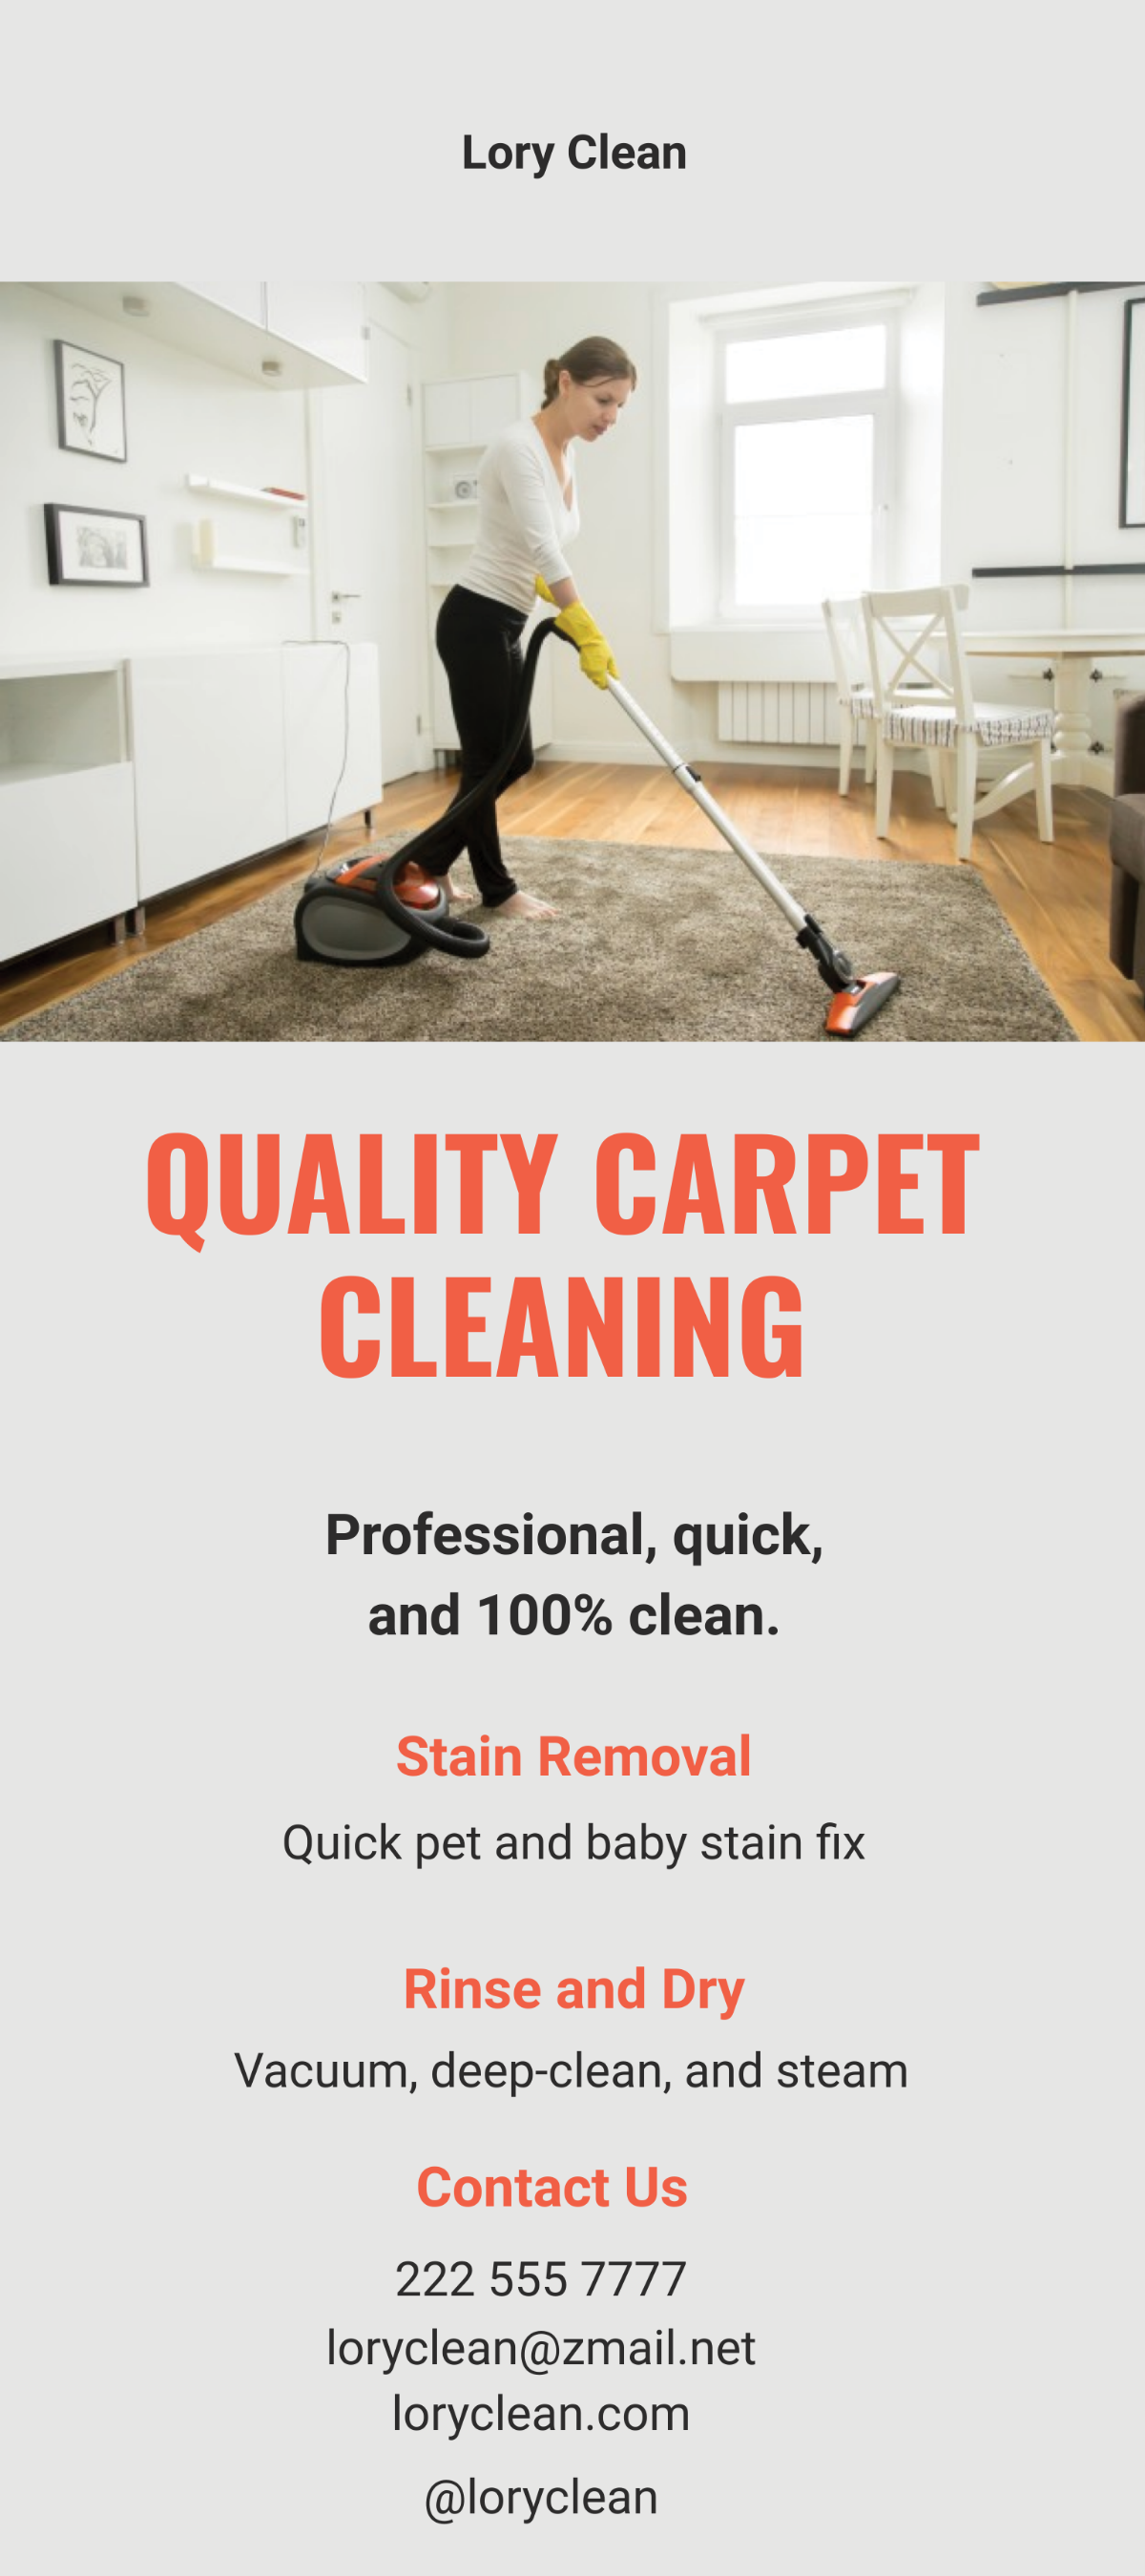 Carpet Cleaning Services DL Card Template